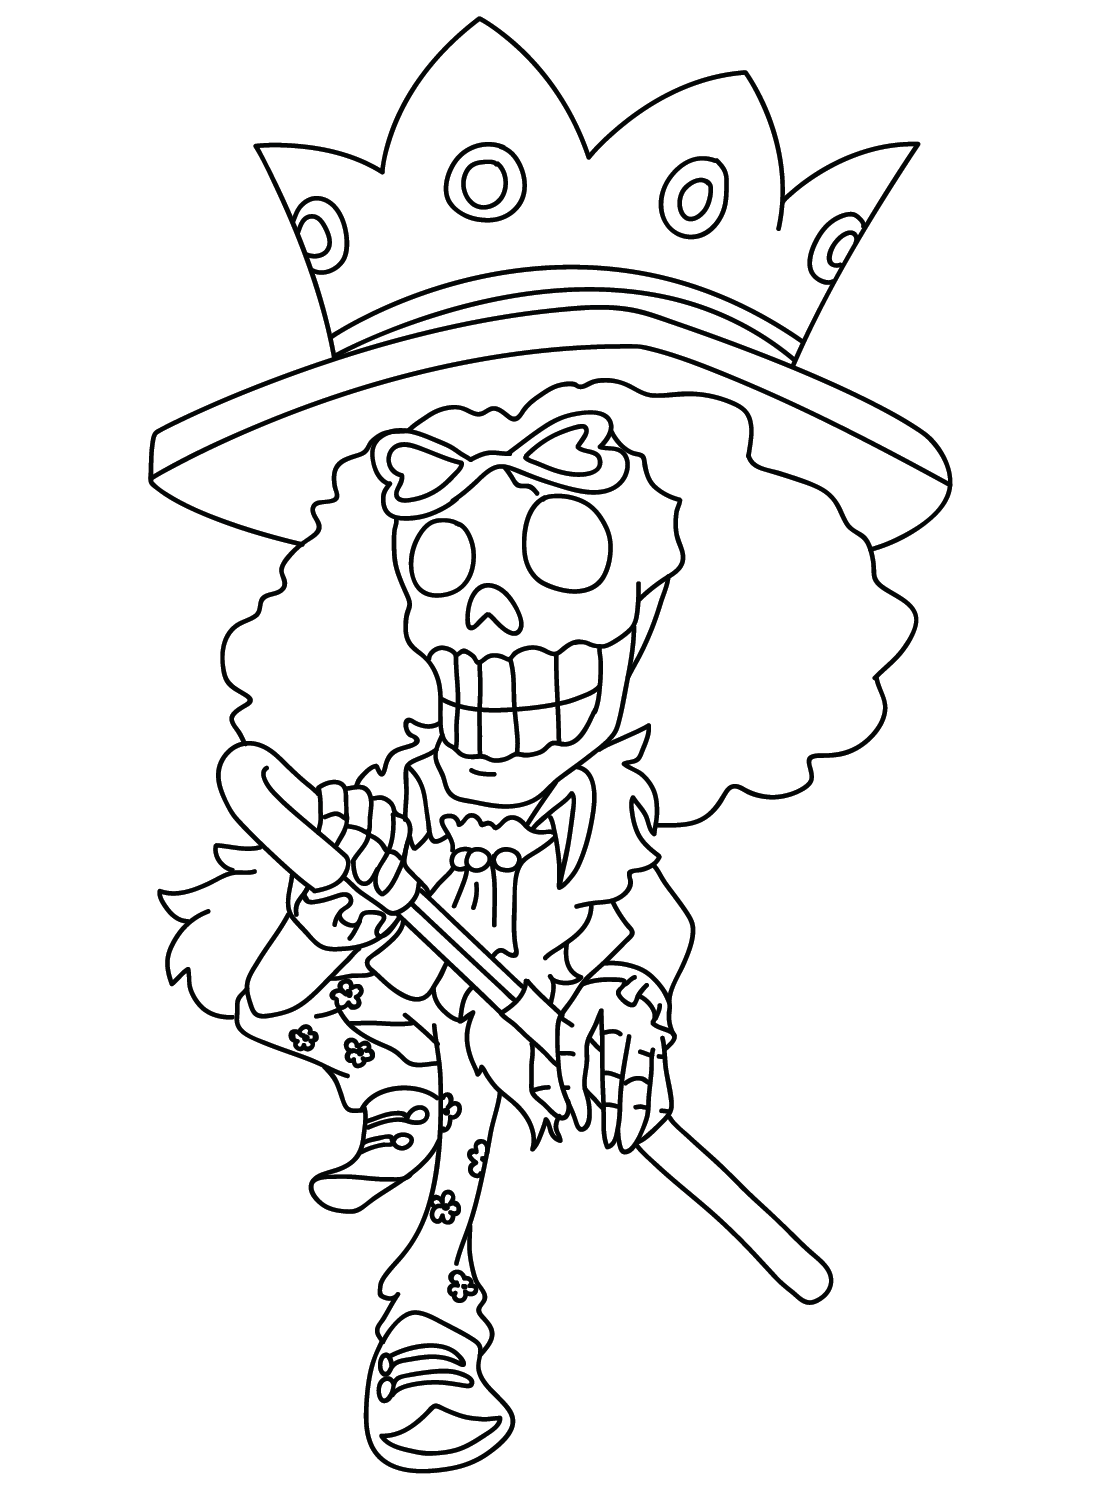 Chibi Brook Coloring Page from Brook